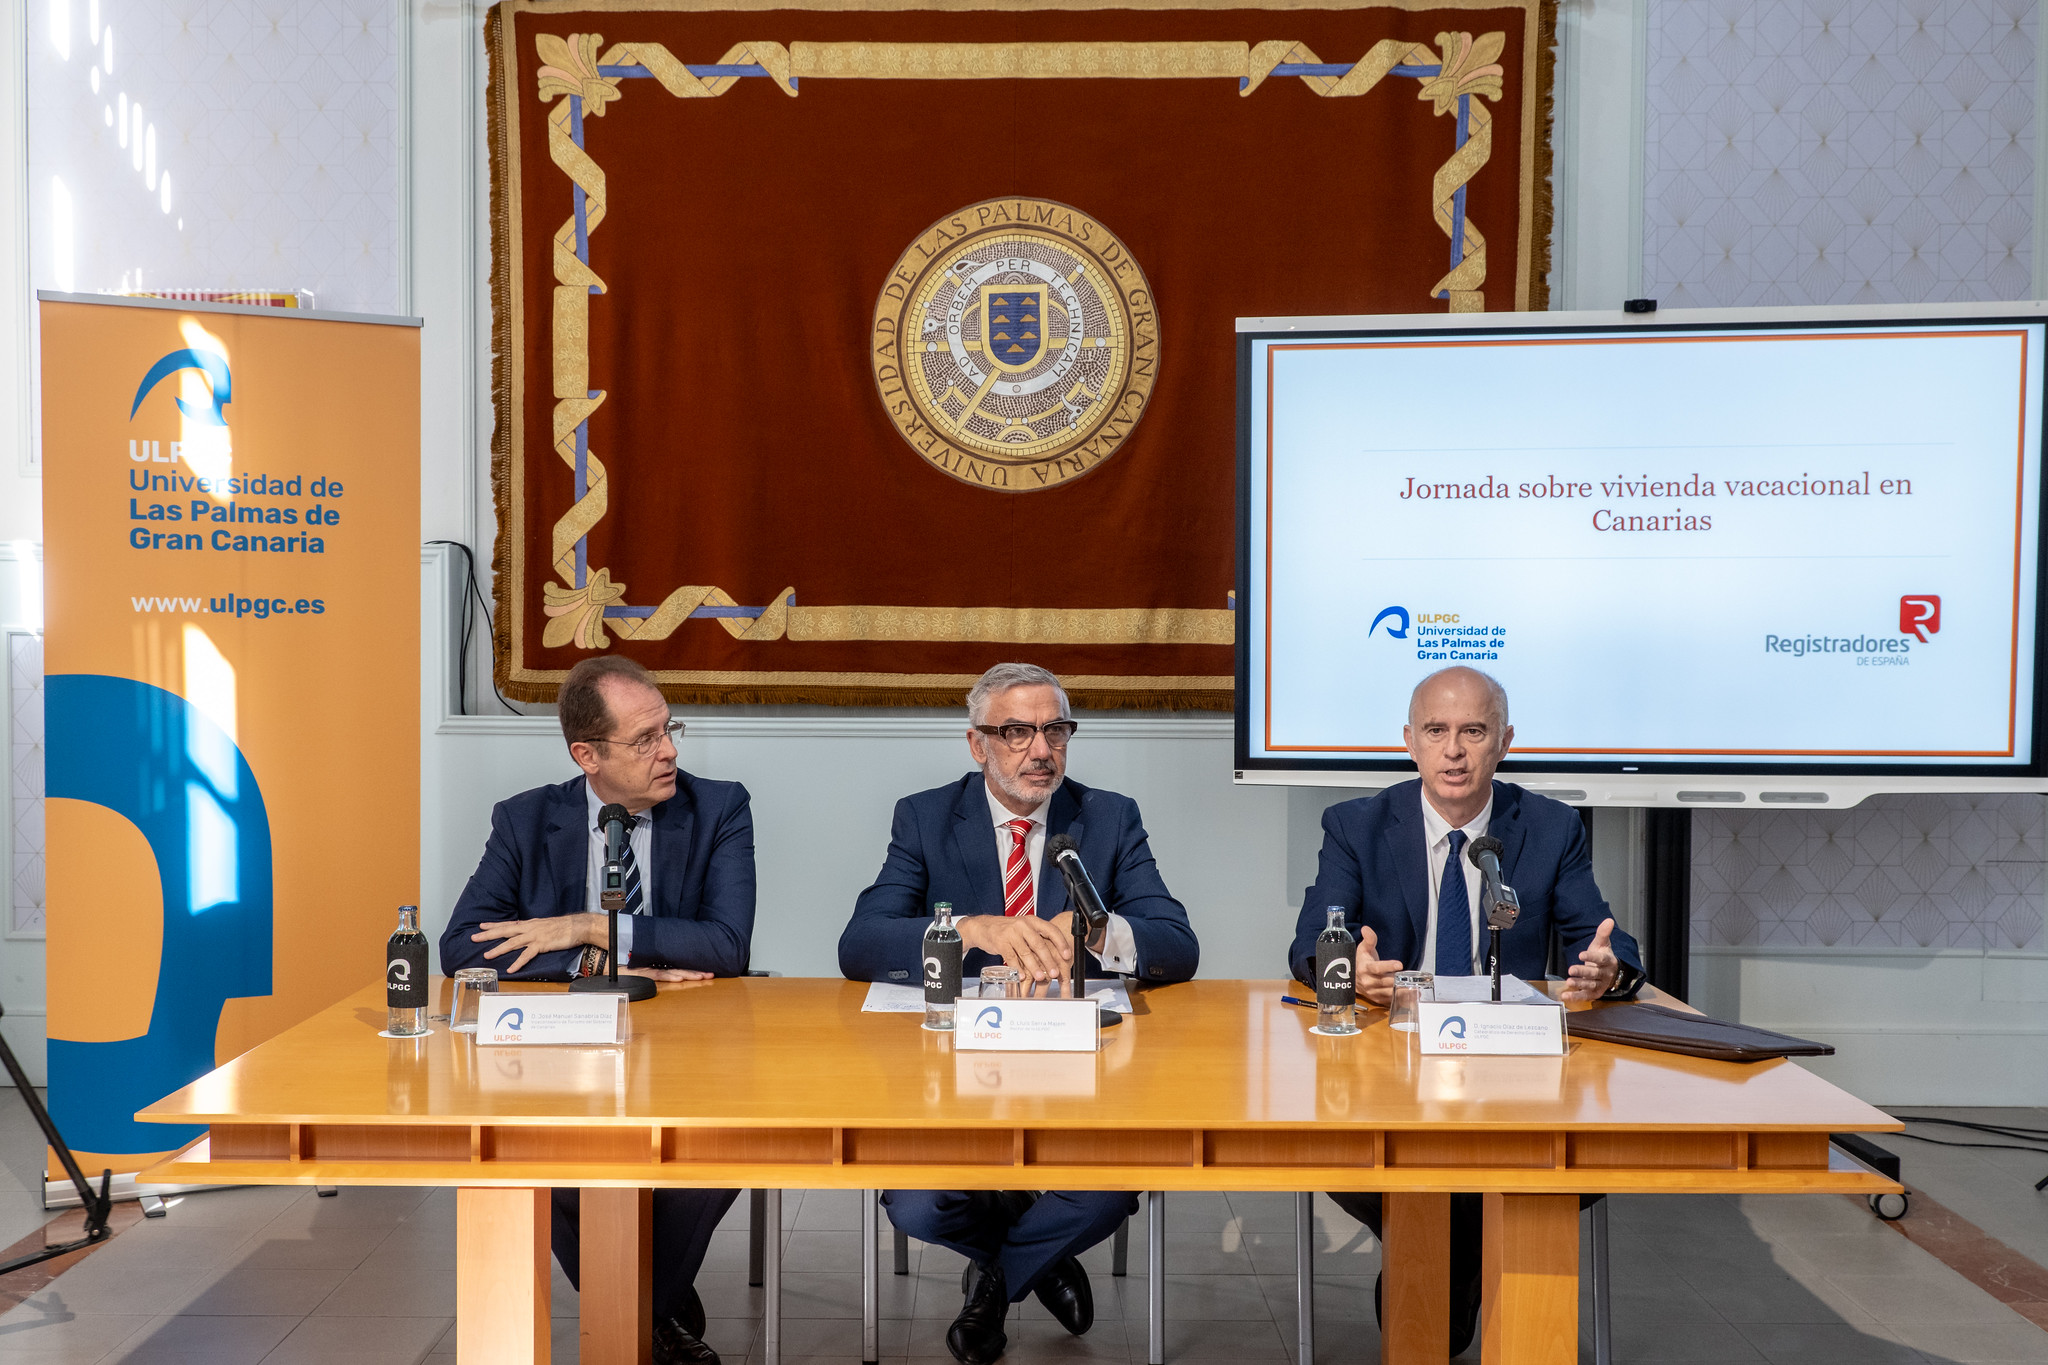 The ULPGC holds a conference on the tourist use of dwellings in the Canary Islands